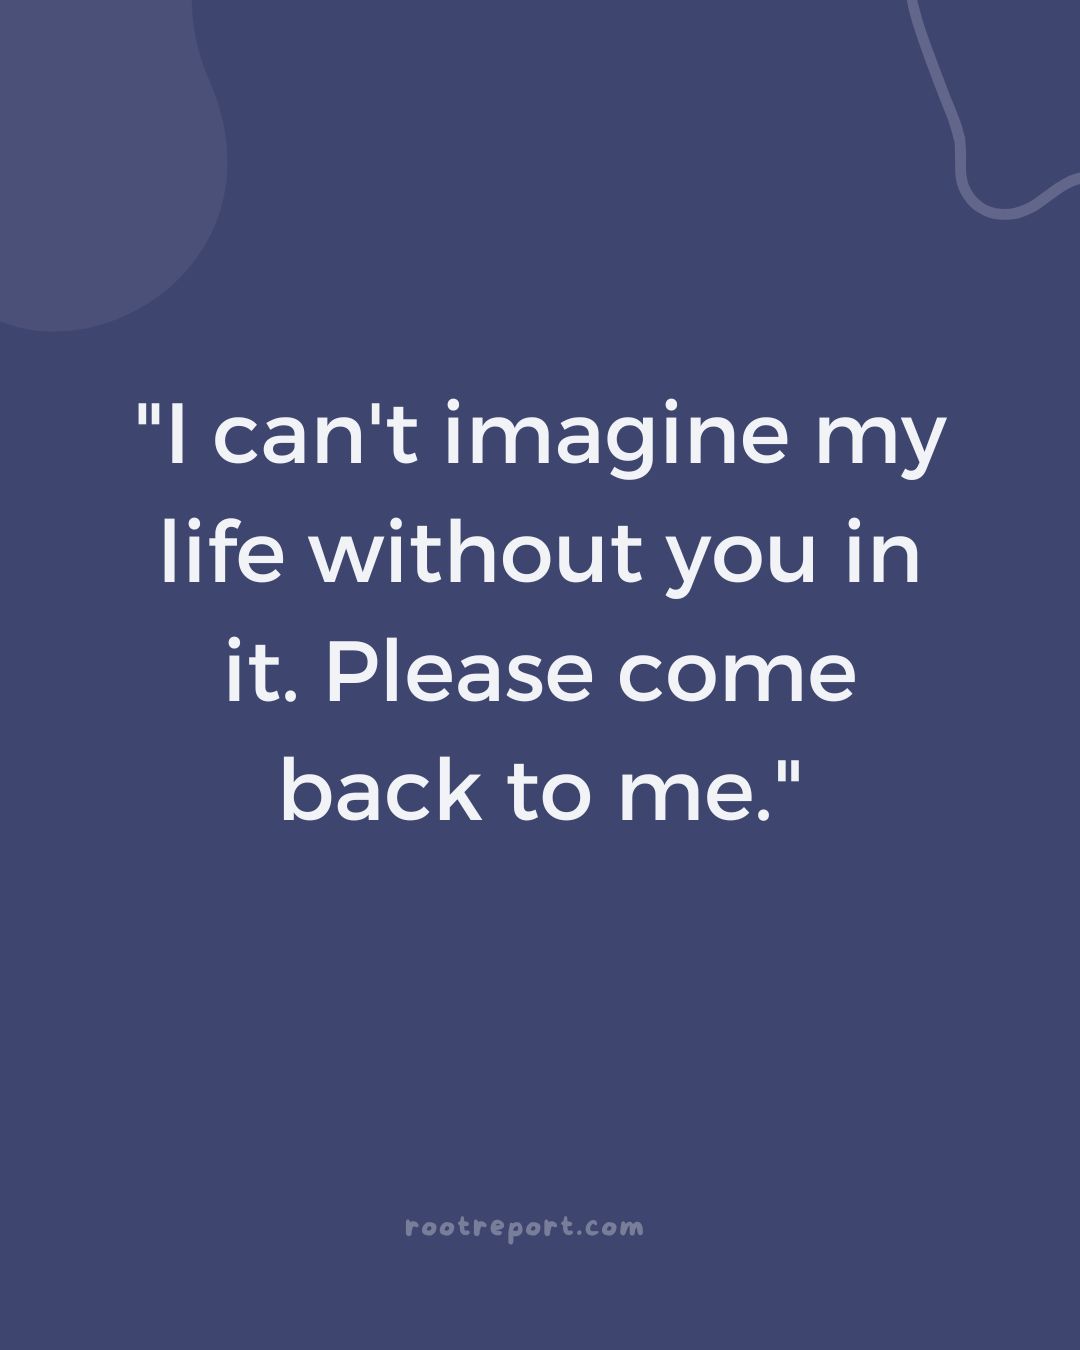 "I can't imagine my life without you in it. Please come back to me."